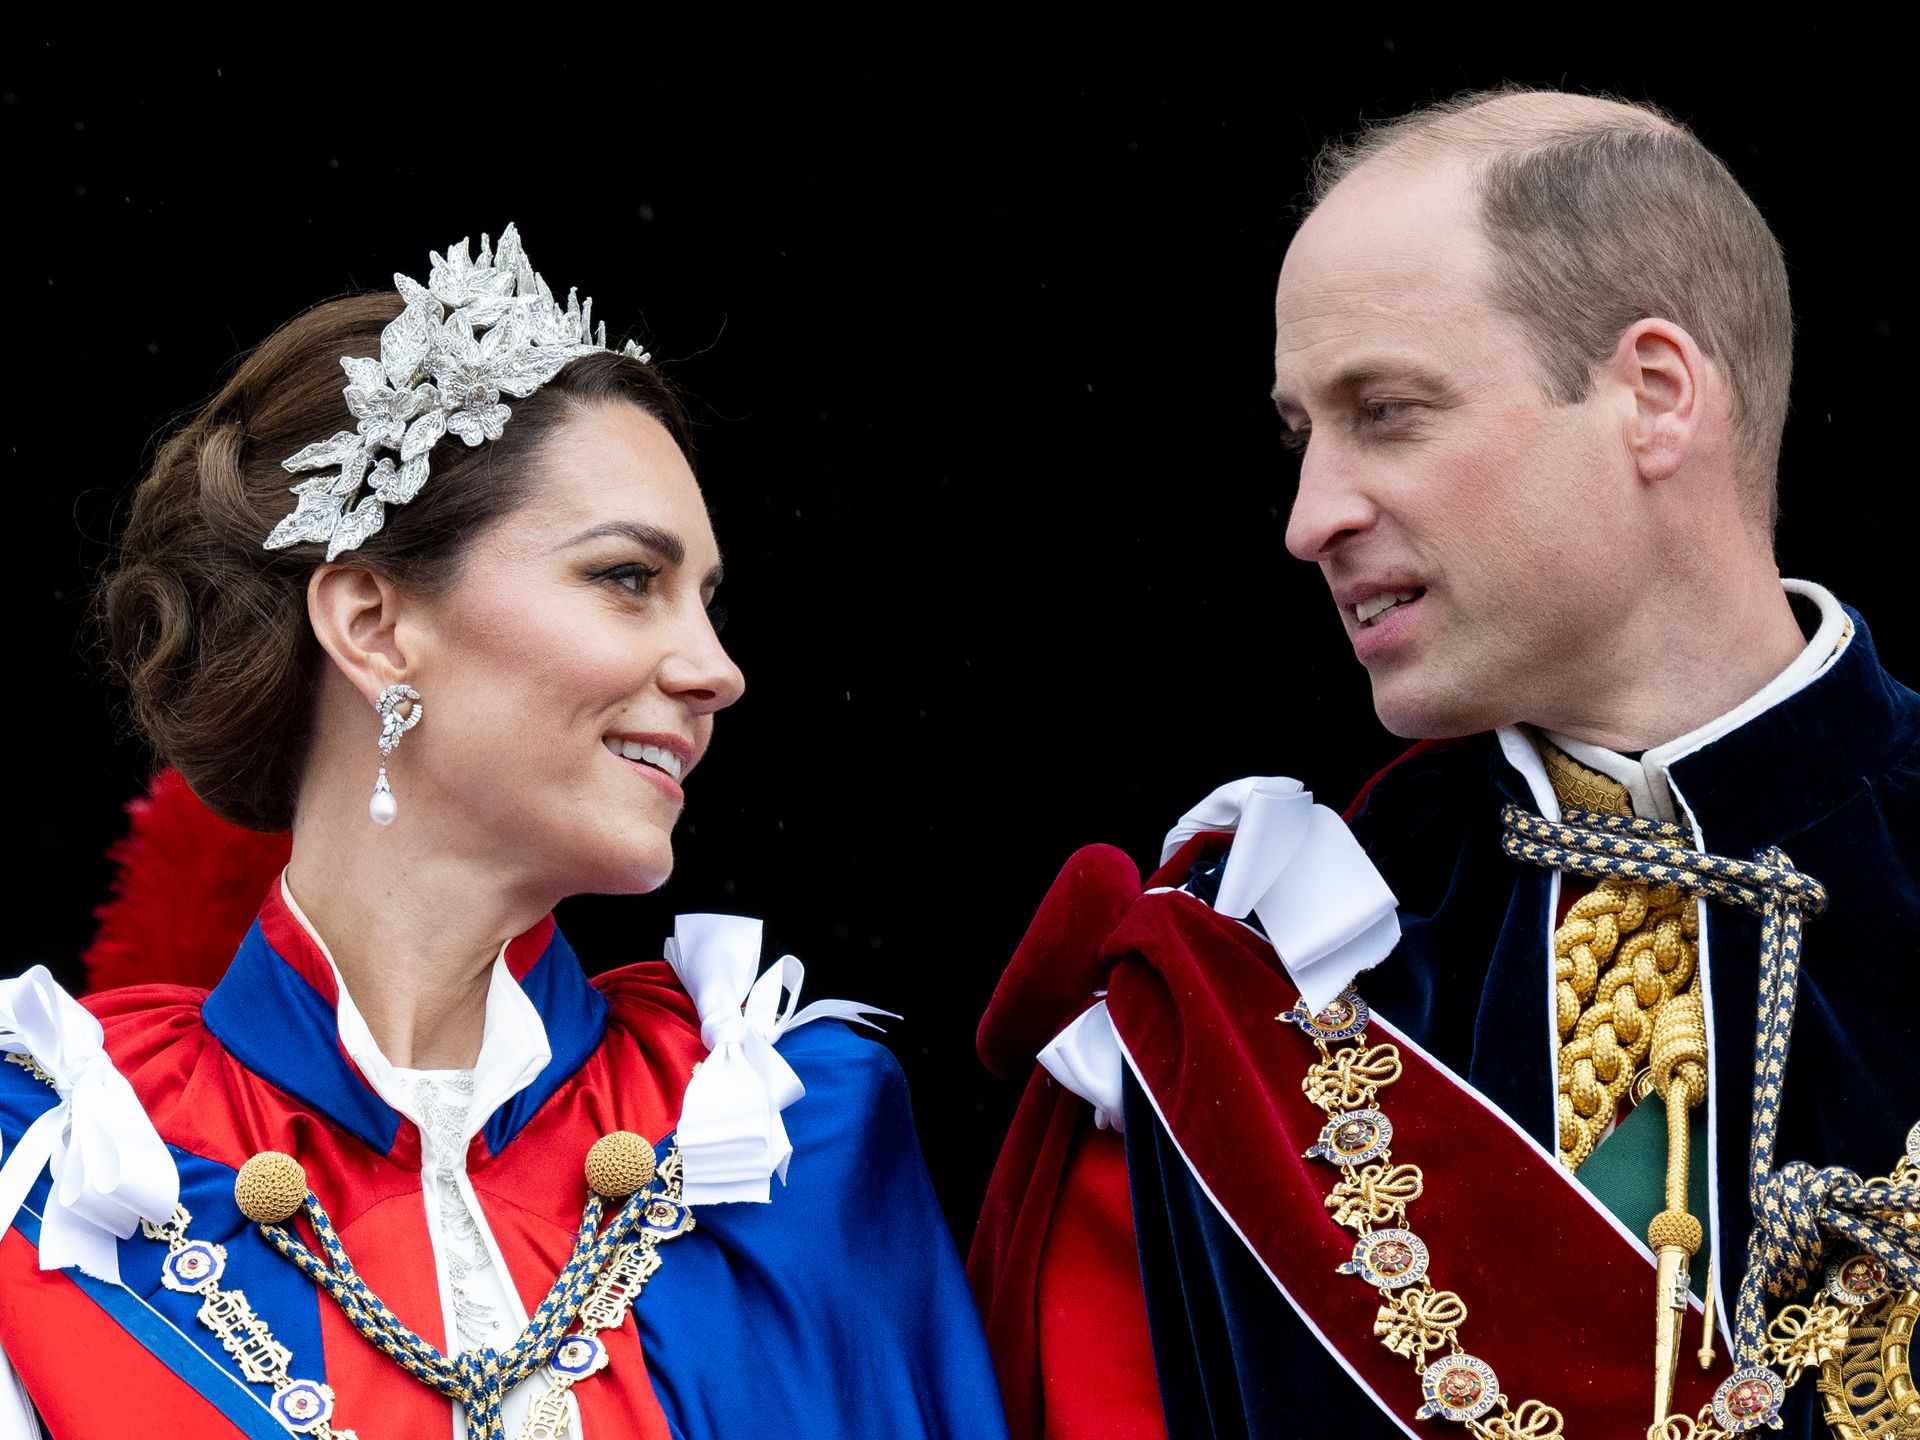 Prince William and Kate Middleton: Wales Regal Love 